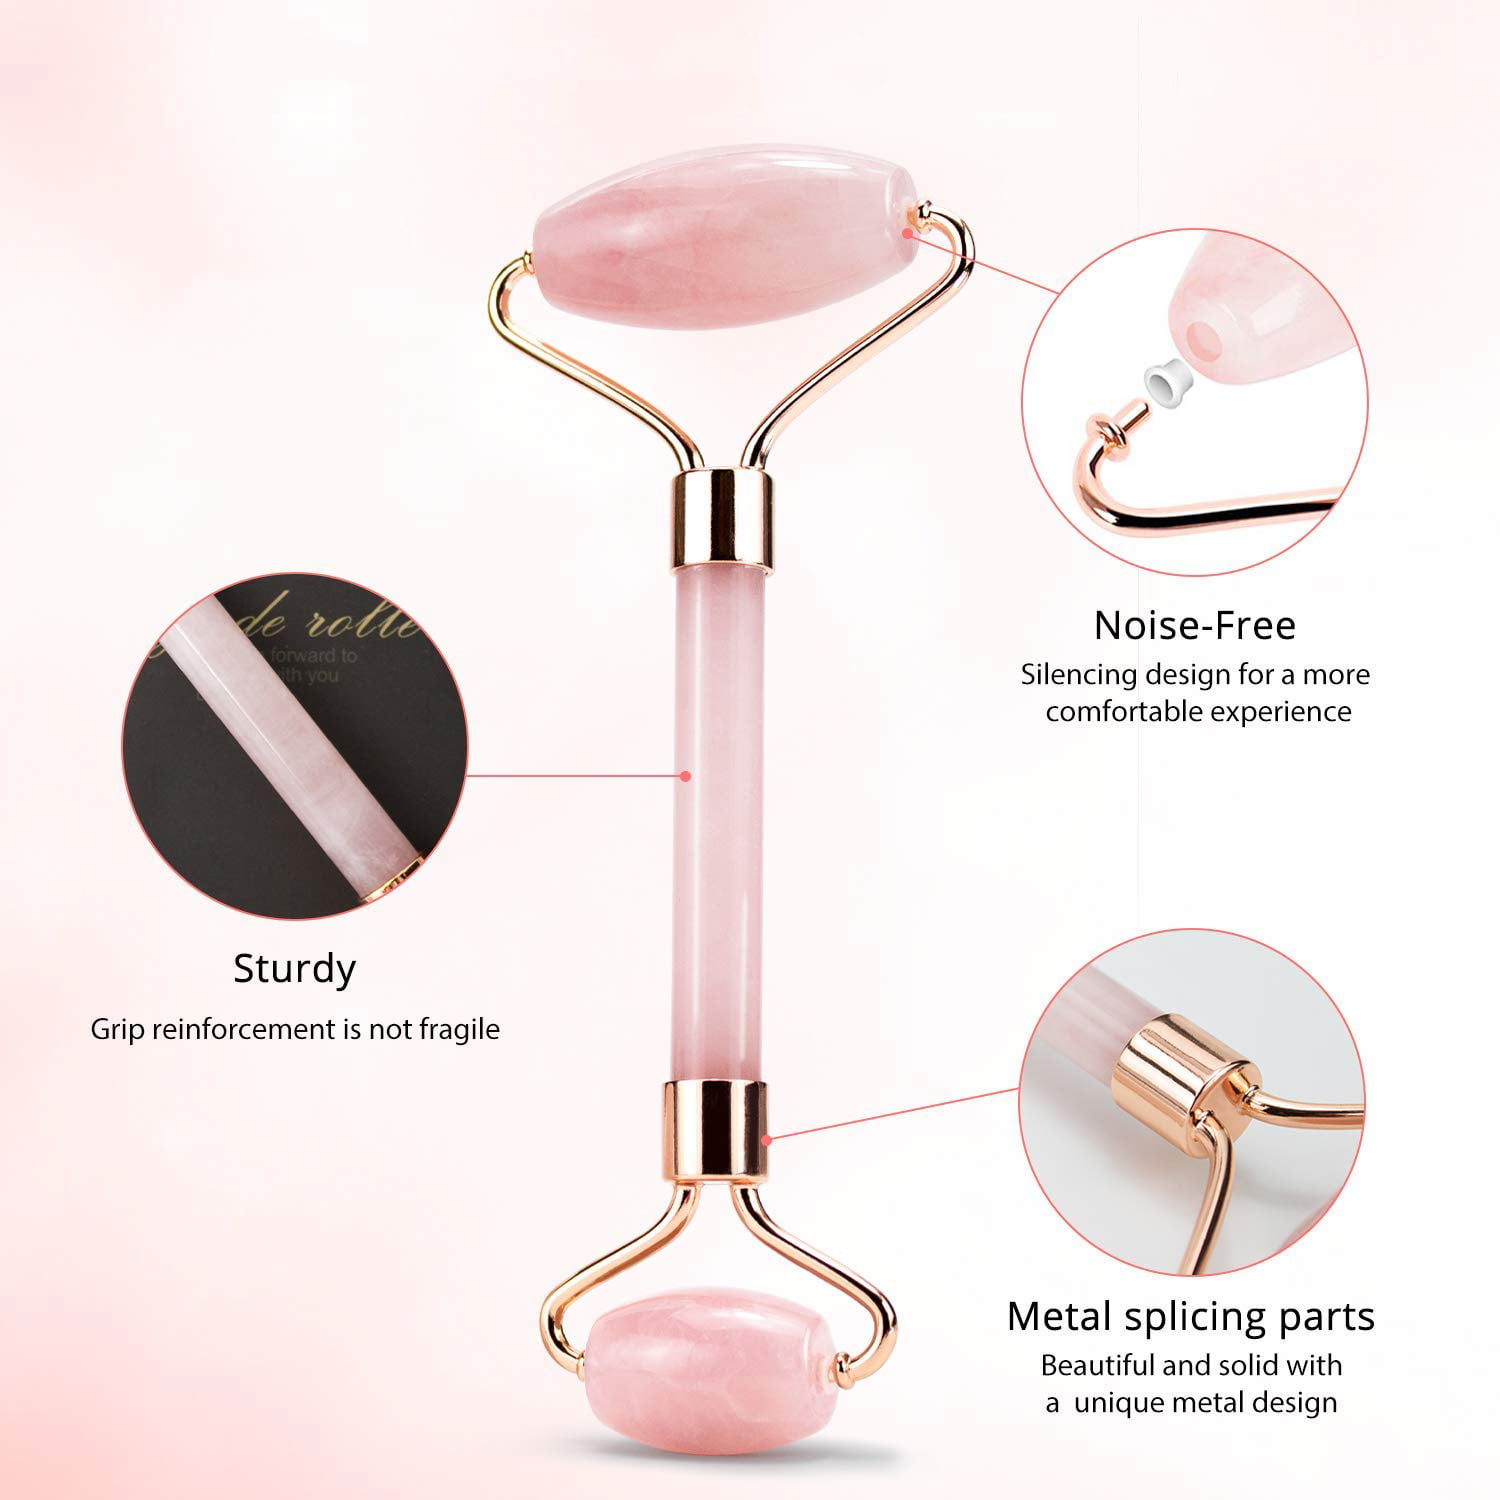 Facial Eye Products | Care Roller Skin Face Beauty Care Roller Face and Face Facial | & Quartz Massager Products -Rose for Tools Ultimate Skin Roller